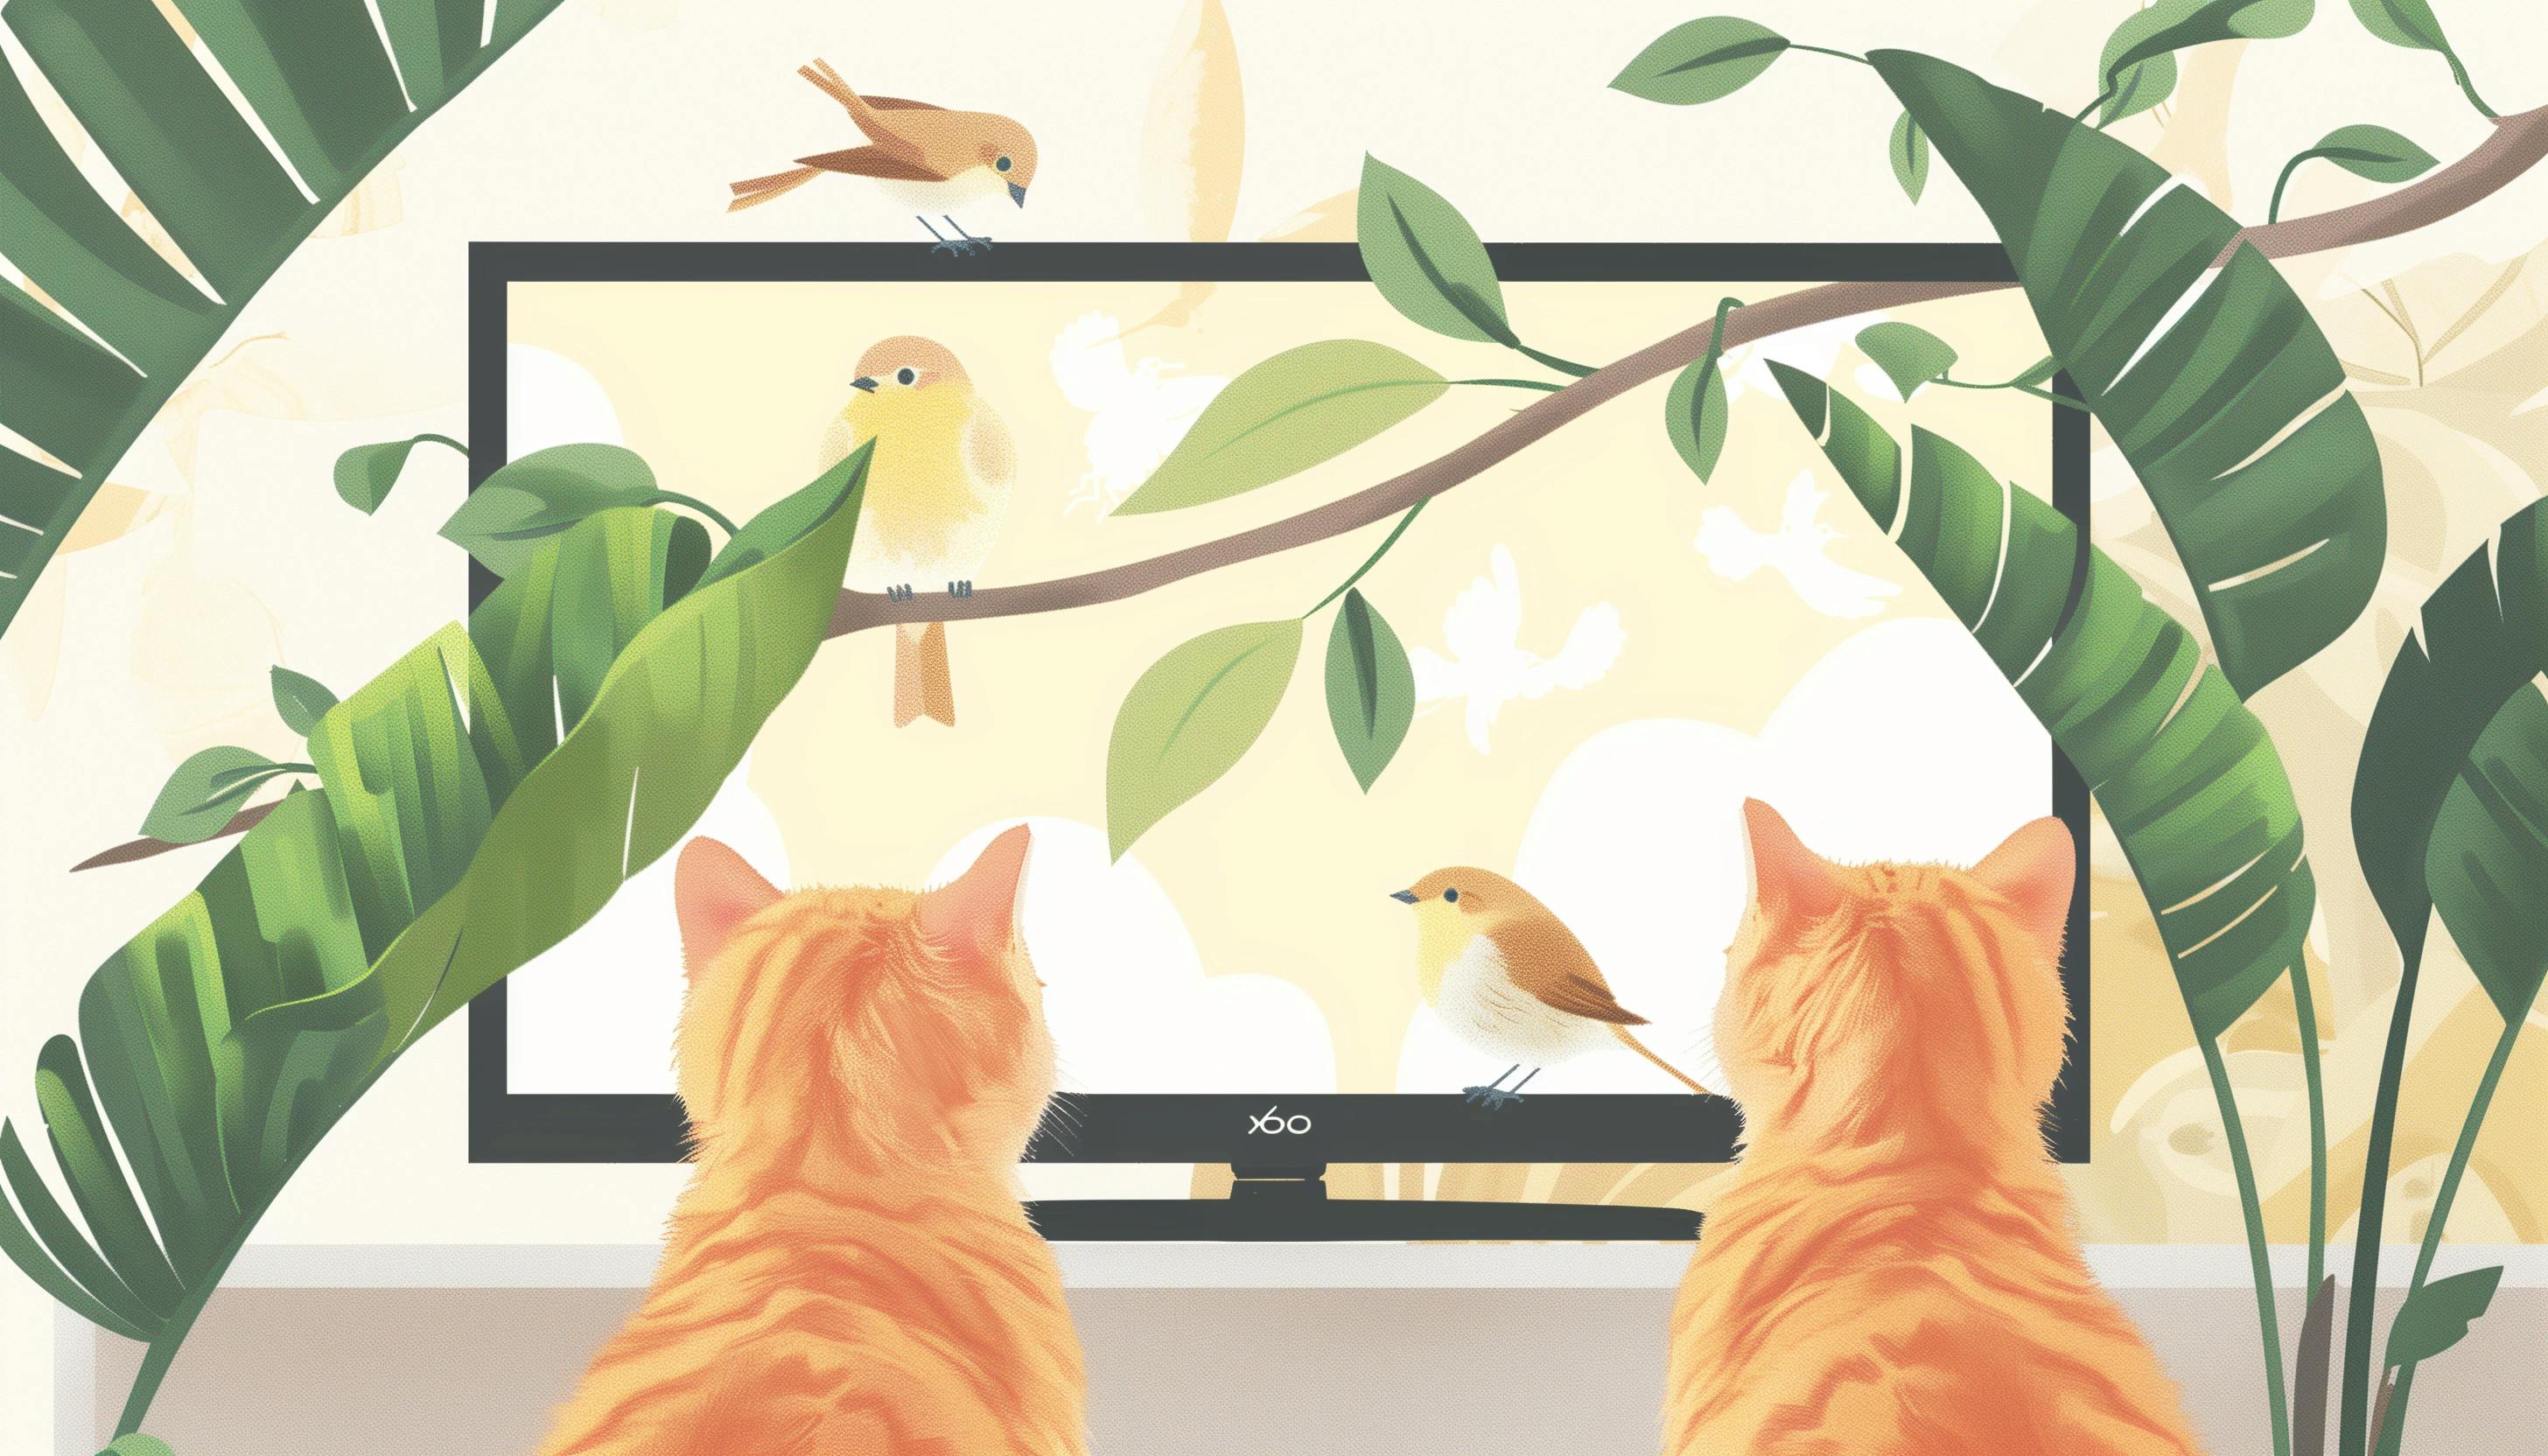 Cat Company/Sitting: Keep your feline friends entertained or soothed with videos designed for cats. Featuring visuals of birds, fish, and other stimuli, these videos provide the purrrfect company for your cat.